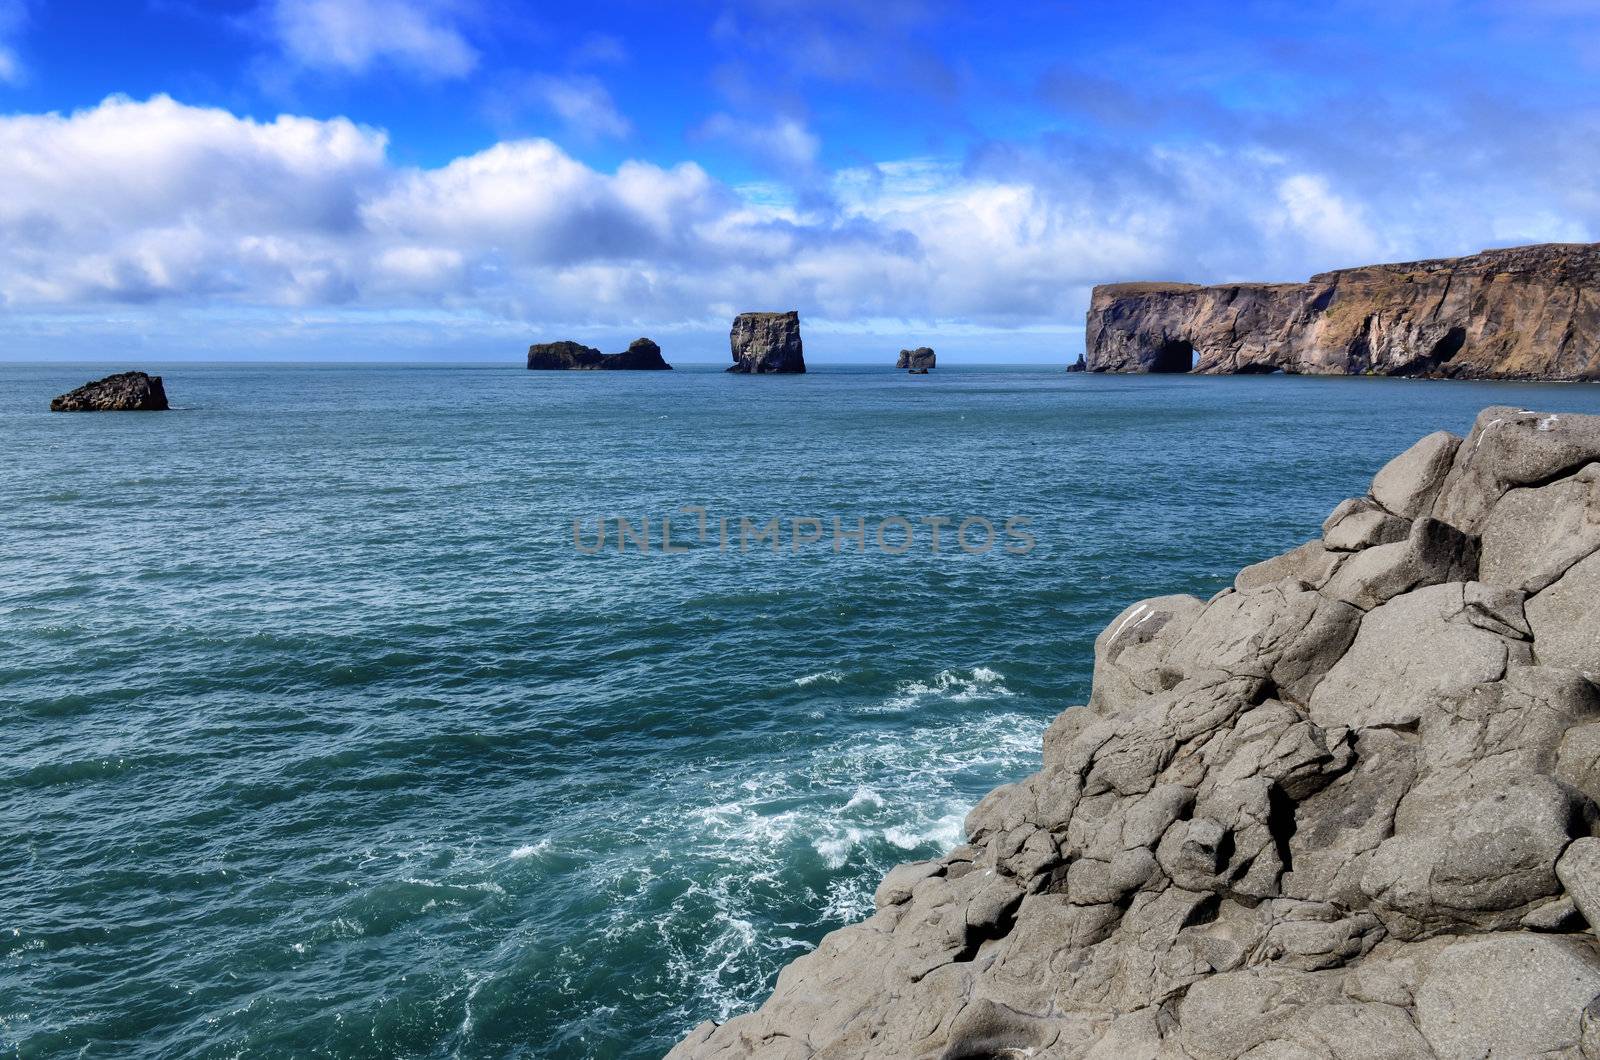 Dyrholeay cliffs and rocks ocean view, Iceland by martinm303